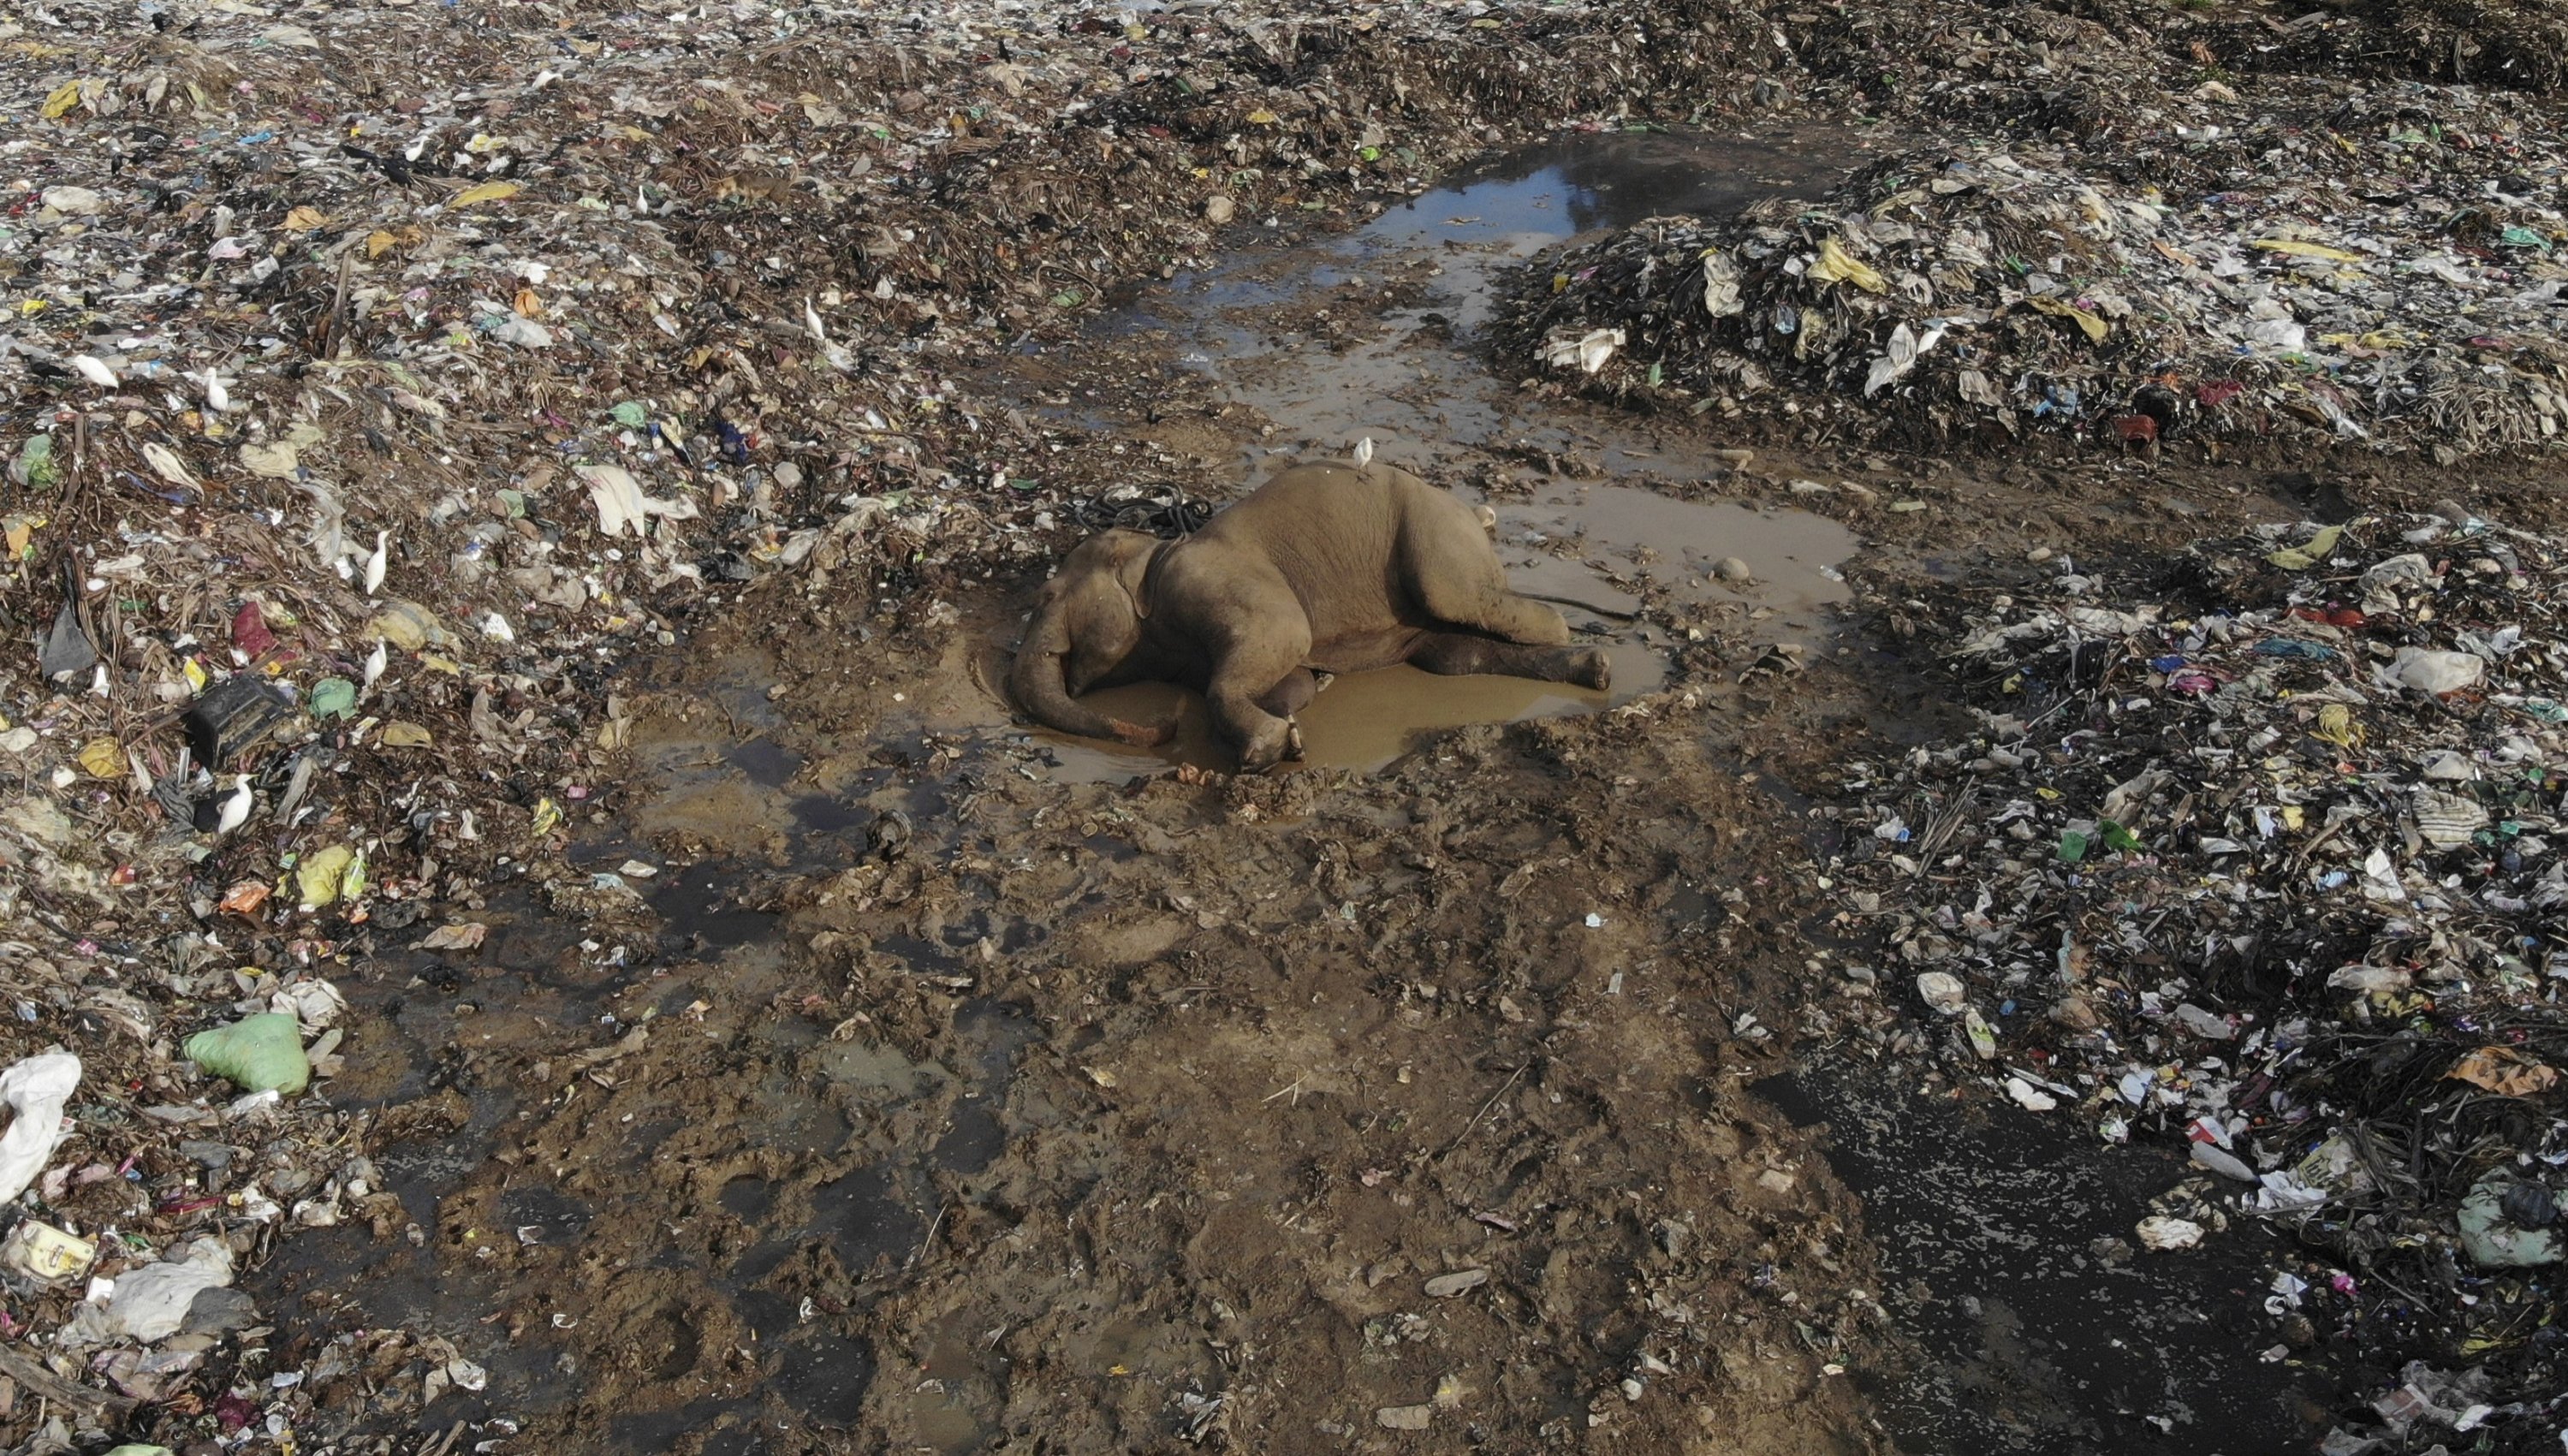 The body of a wild elephant lies in an open landfill in Pallakkadu village in Ampara district, about 210 kilometers (130 miles) east of the capital Colombo, Sri Lanka, Jan. 6, 2022. (AP Photo)